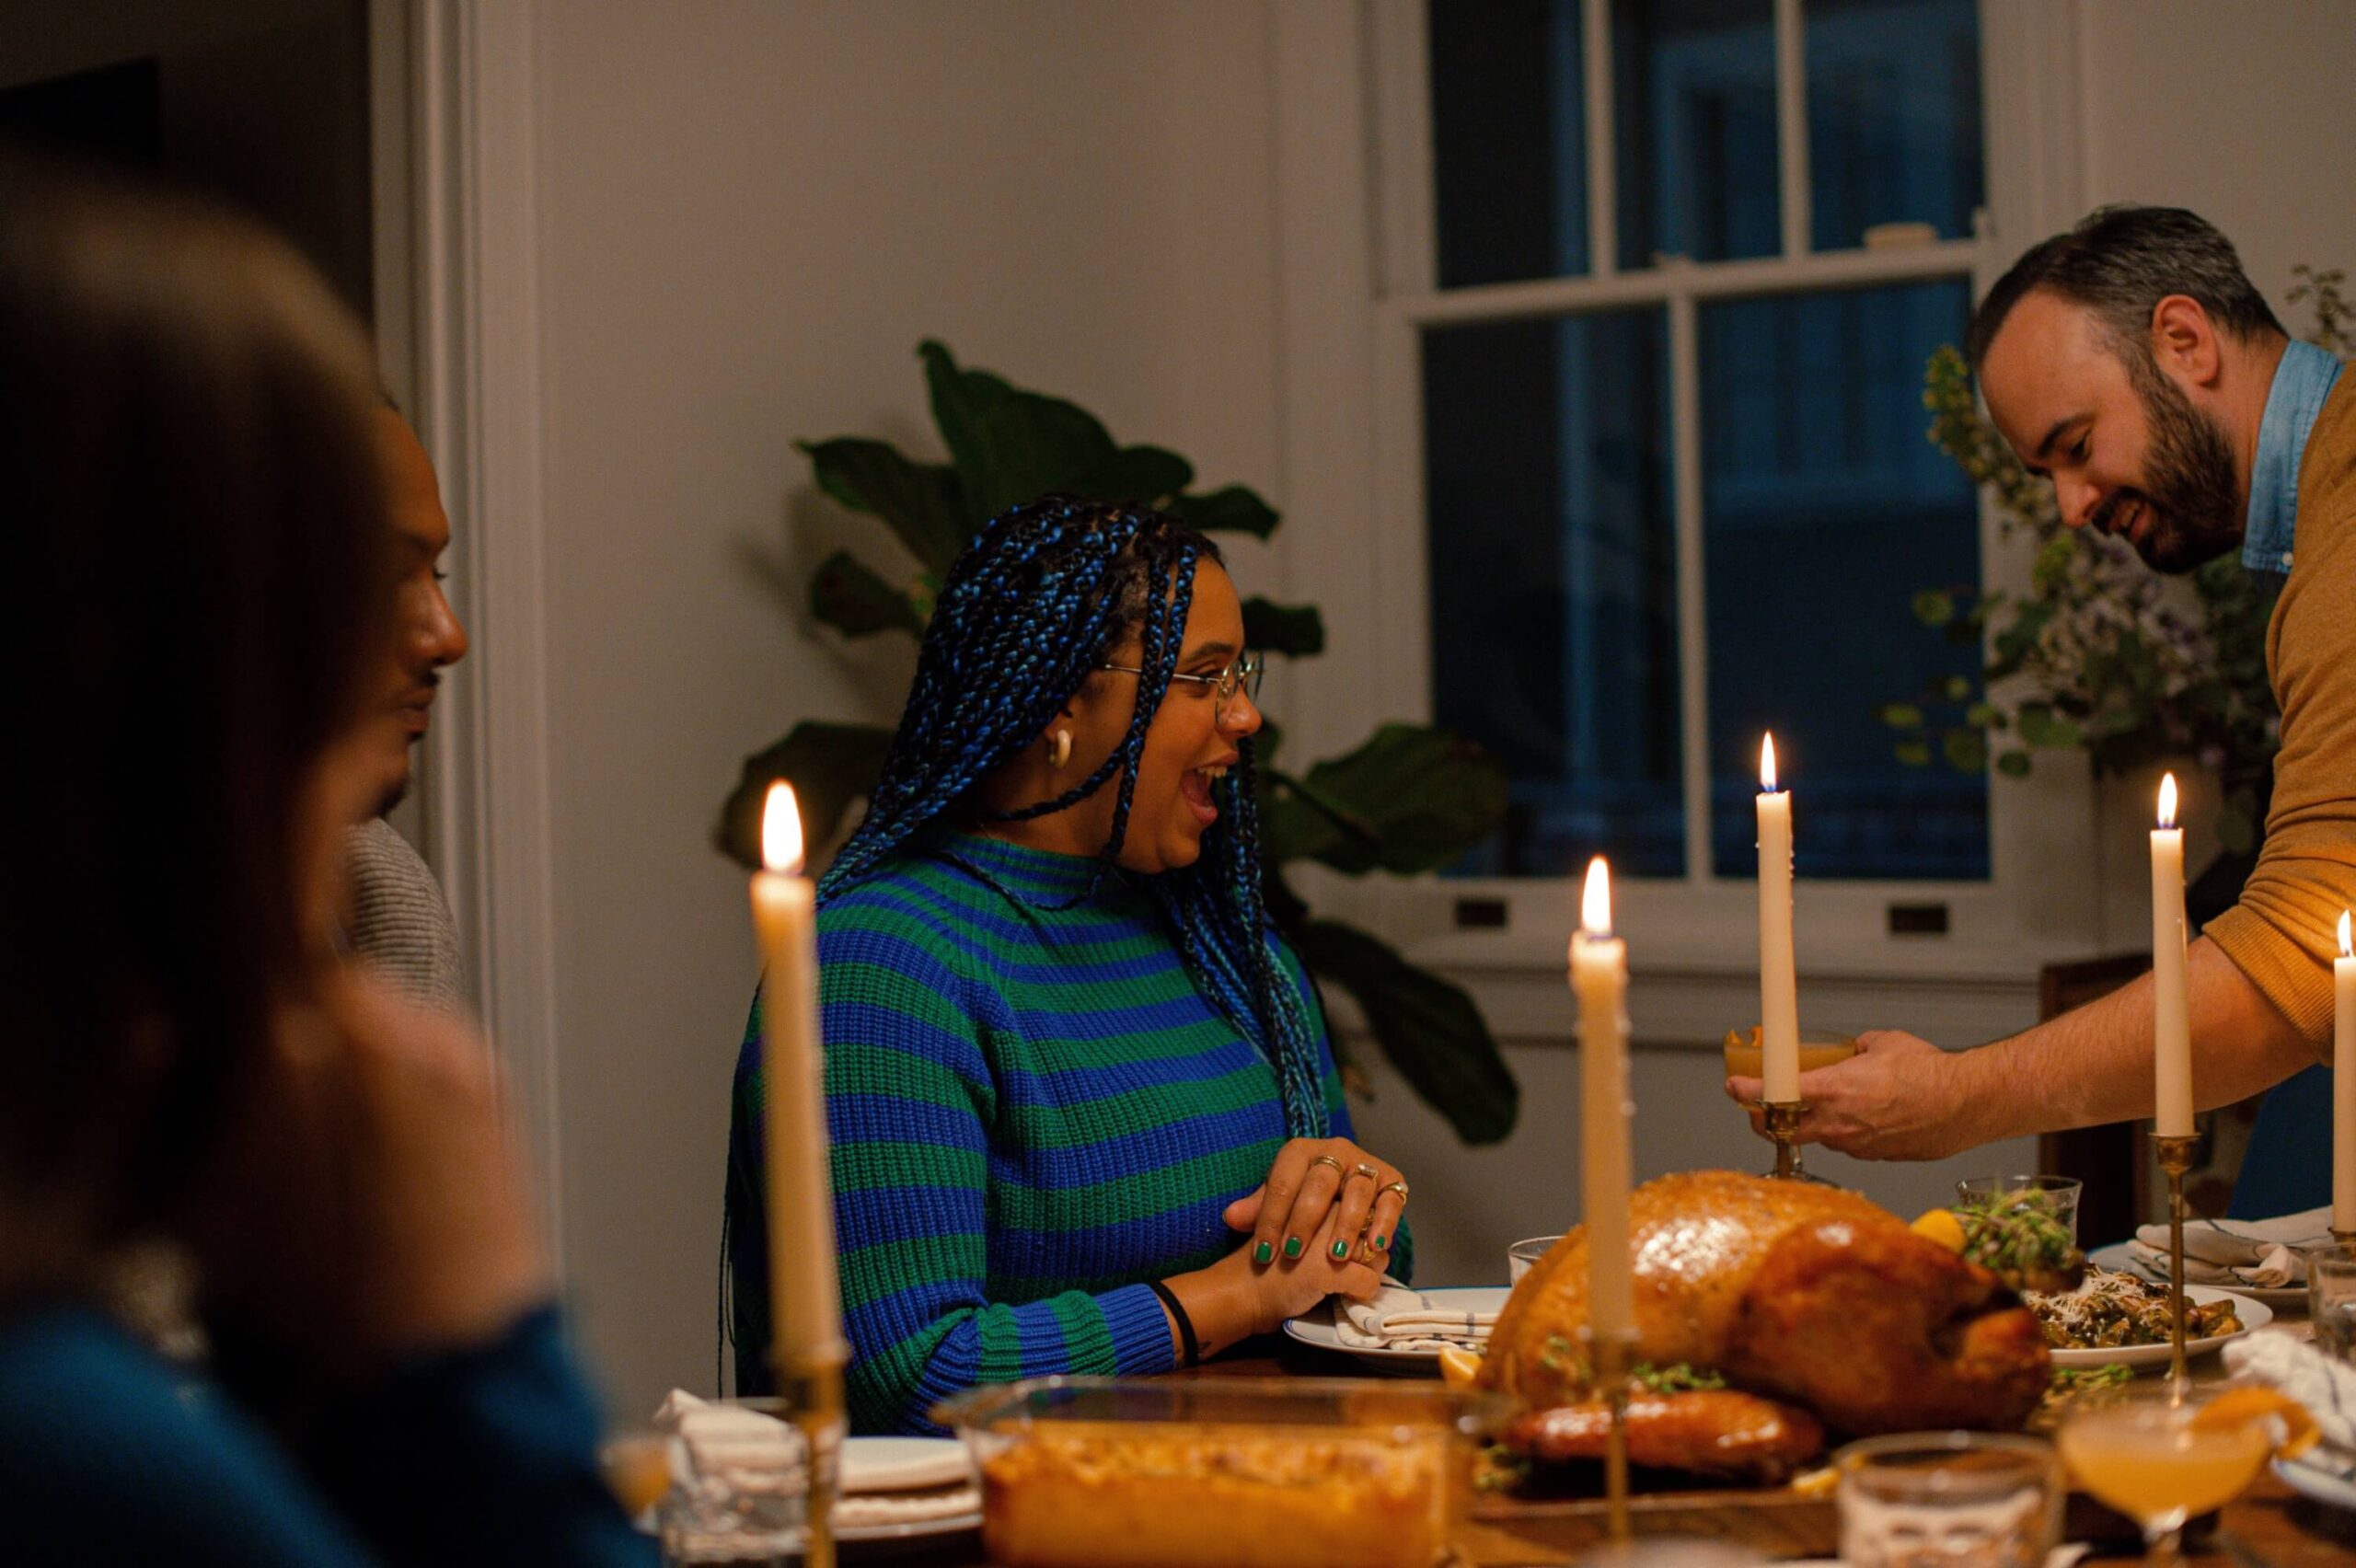 A family sits at a holiday meal surrounded by lit candles and a food spread including a turkey.